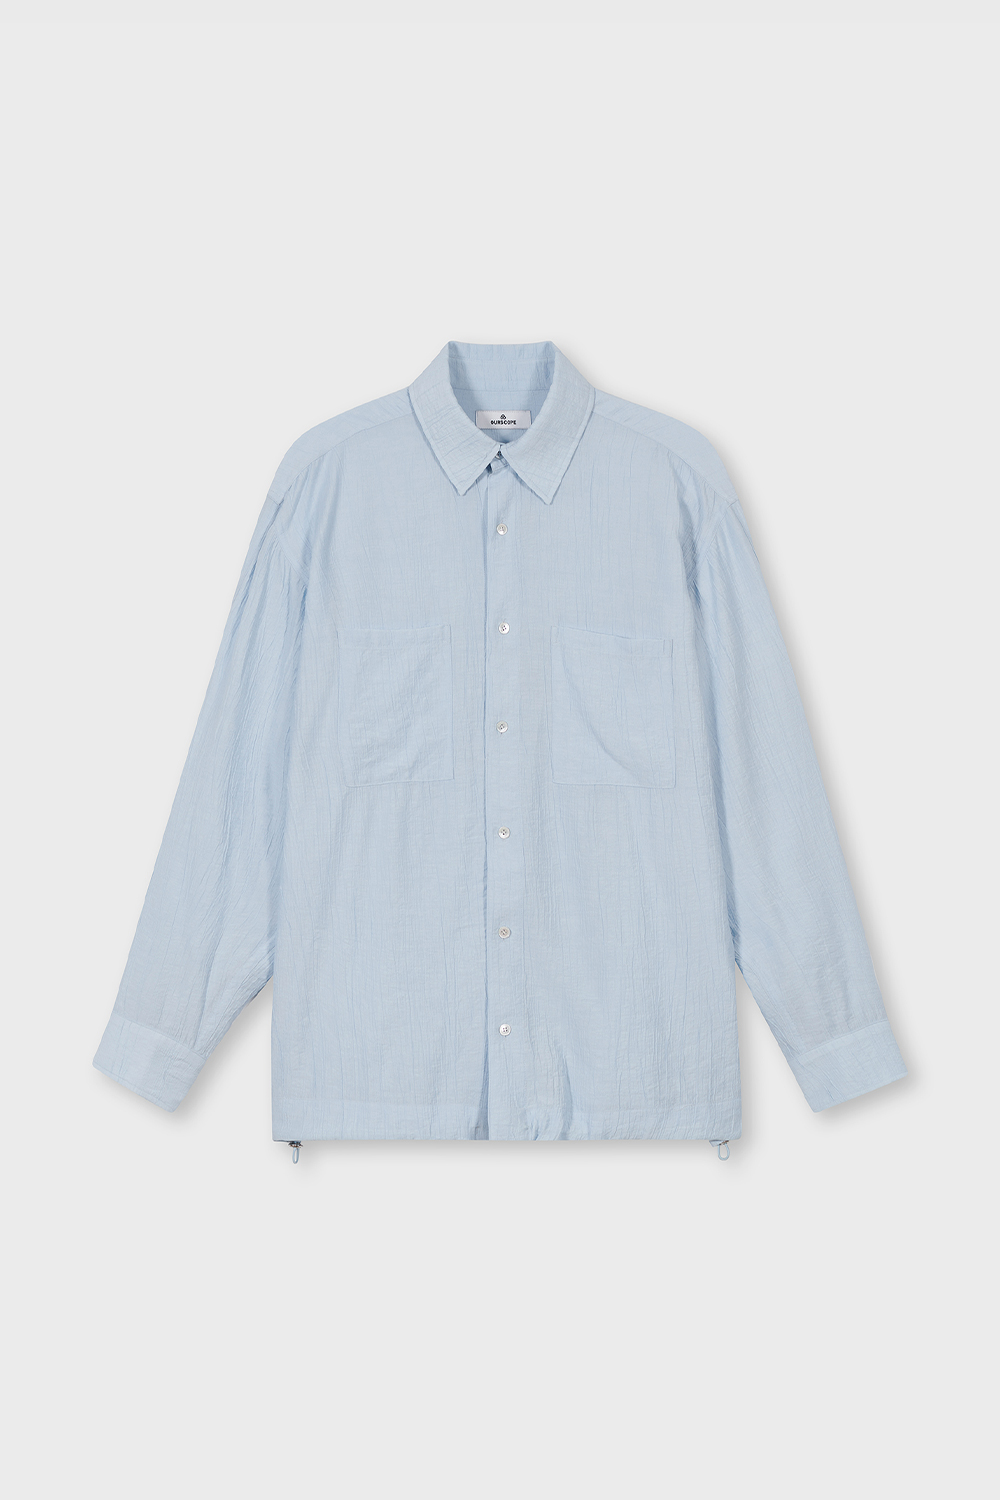 Aiden String Shirts (Sky Blue)